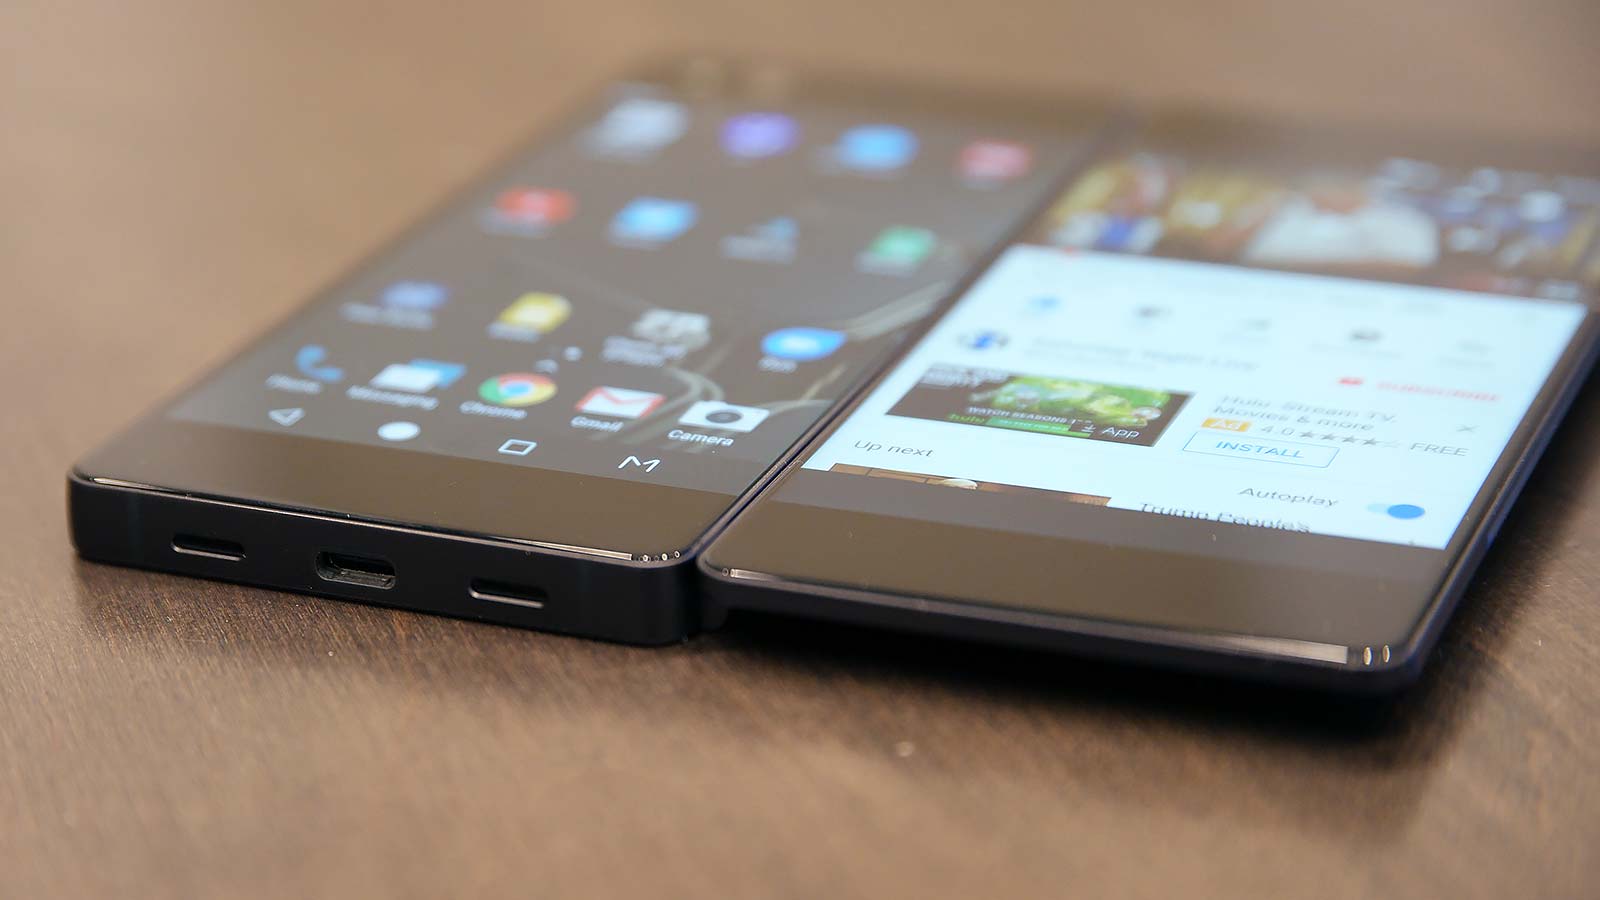 ZTE’s Dual Screen Axon M Phone: The Gizmodo Hands-On